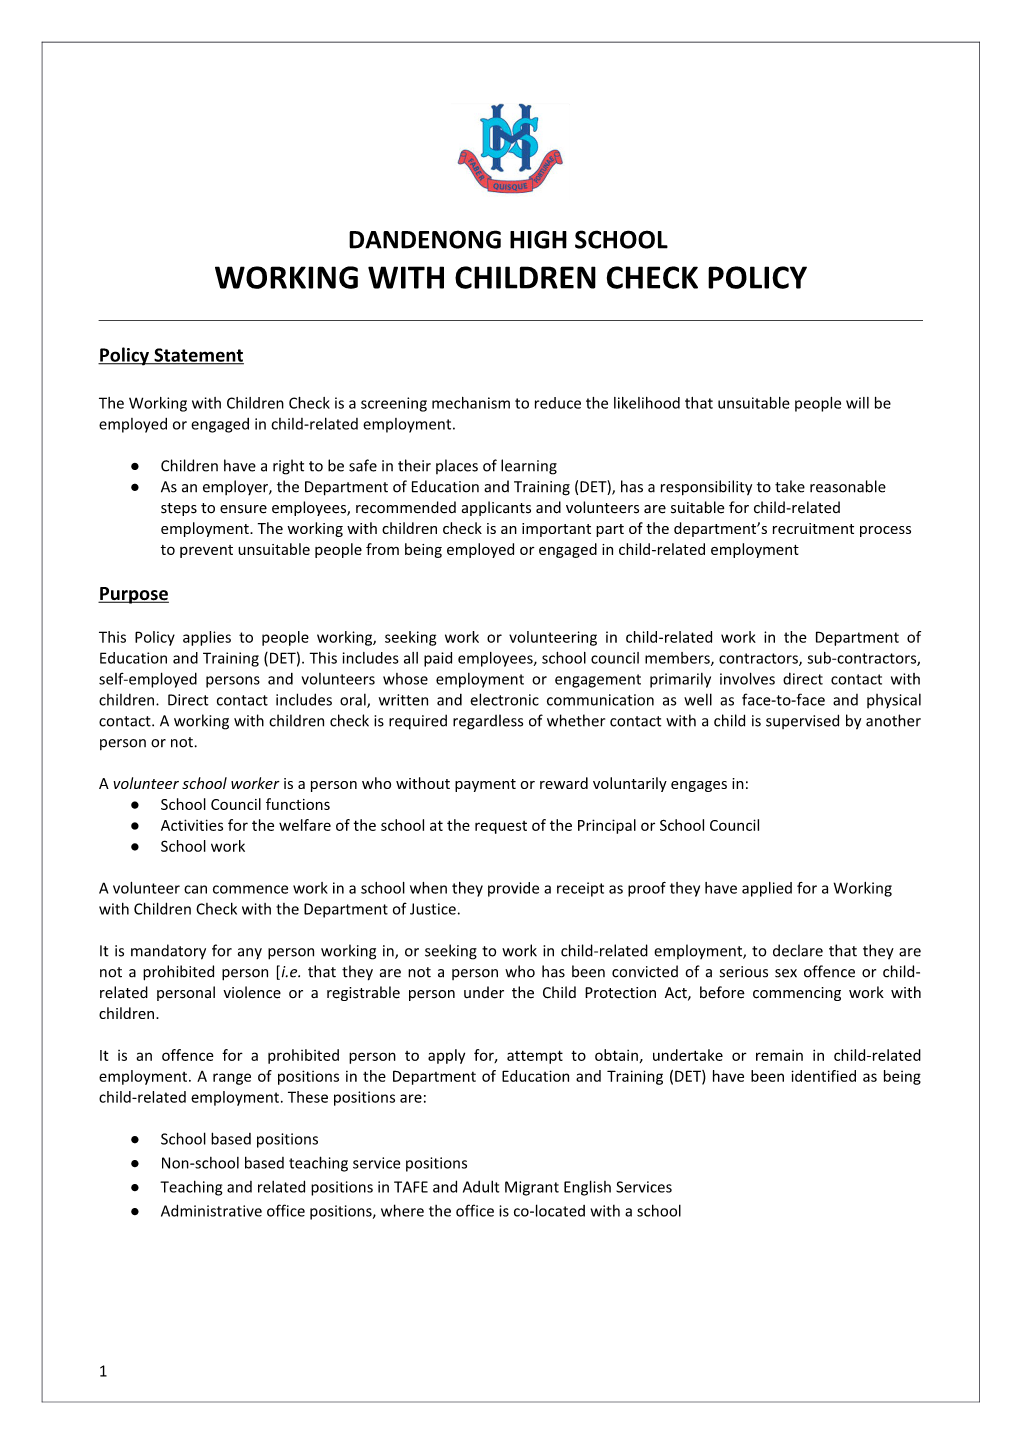 Working with Children Check Policy